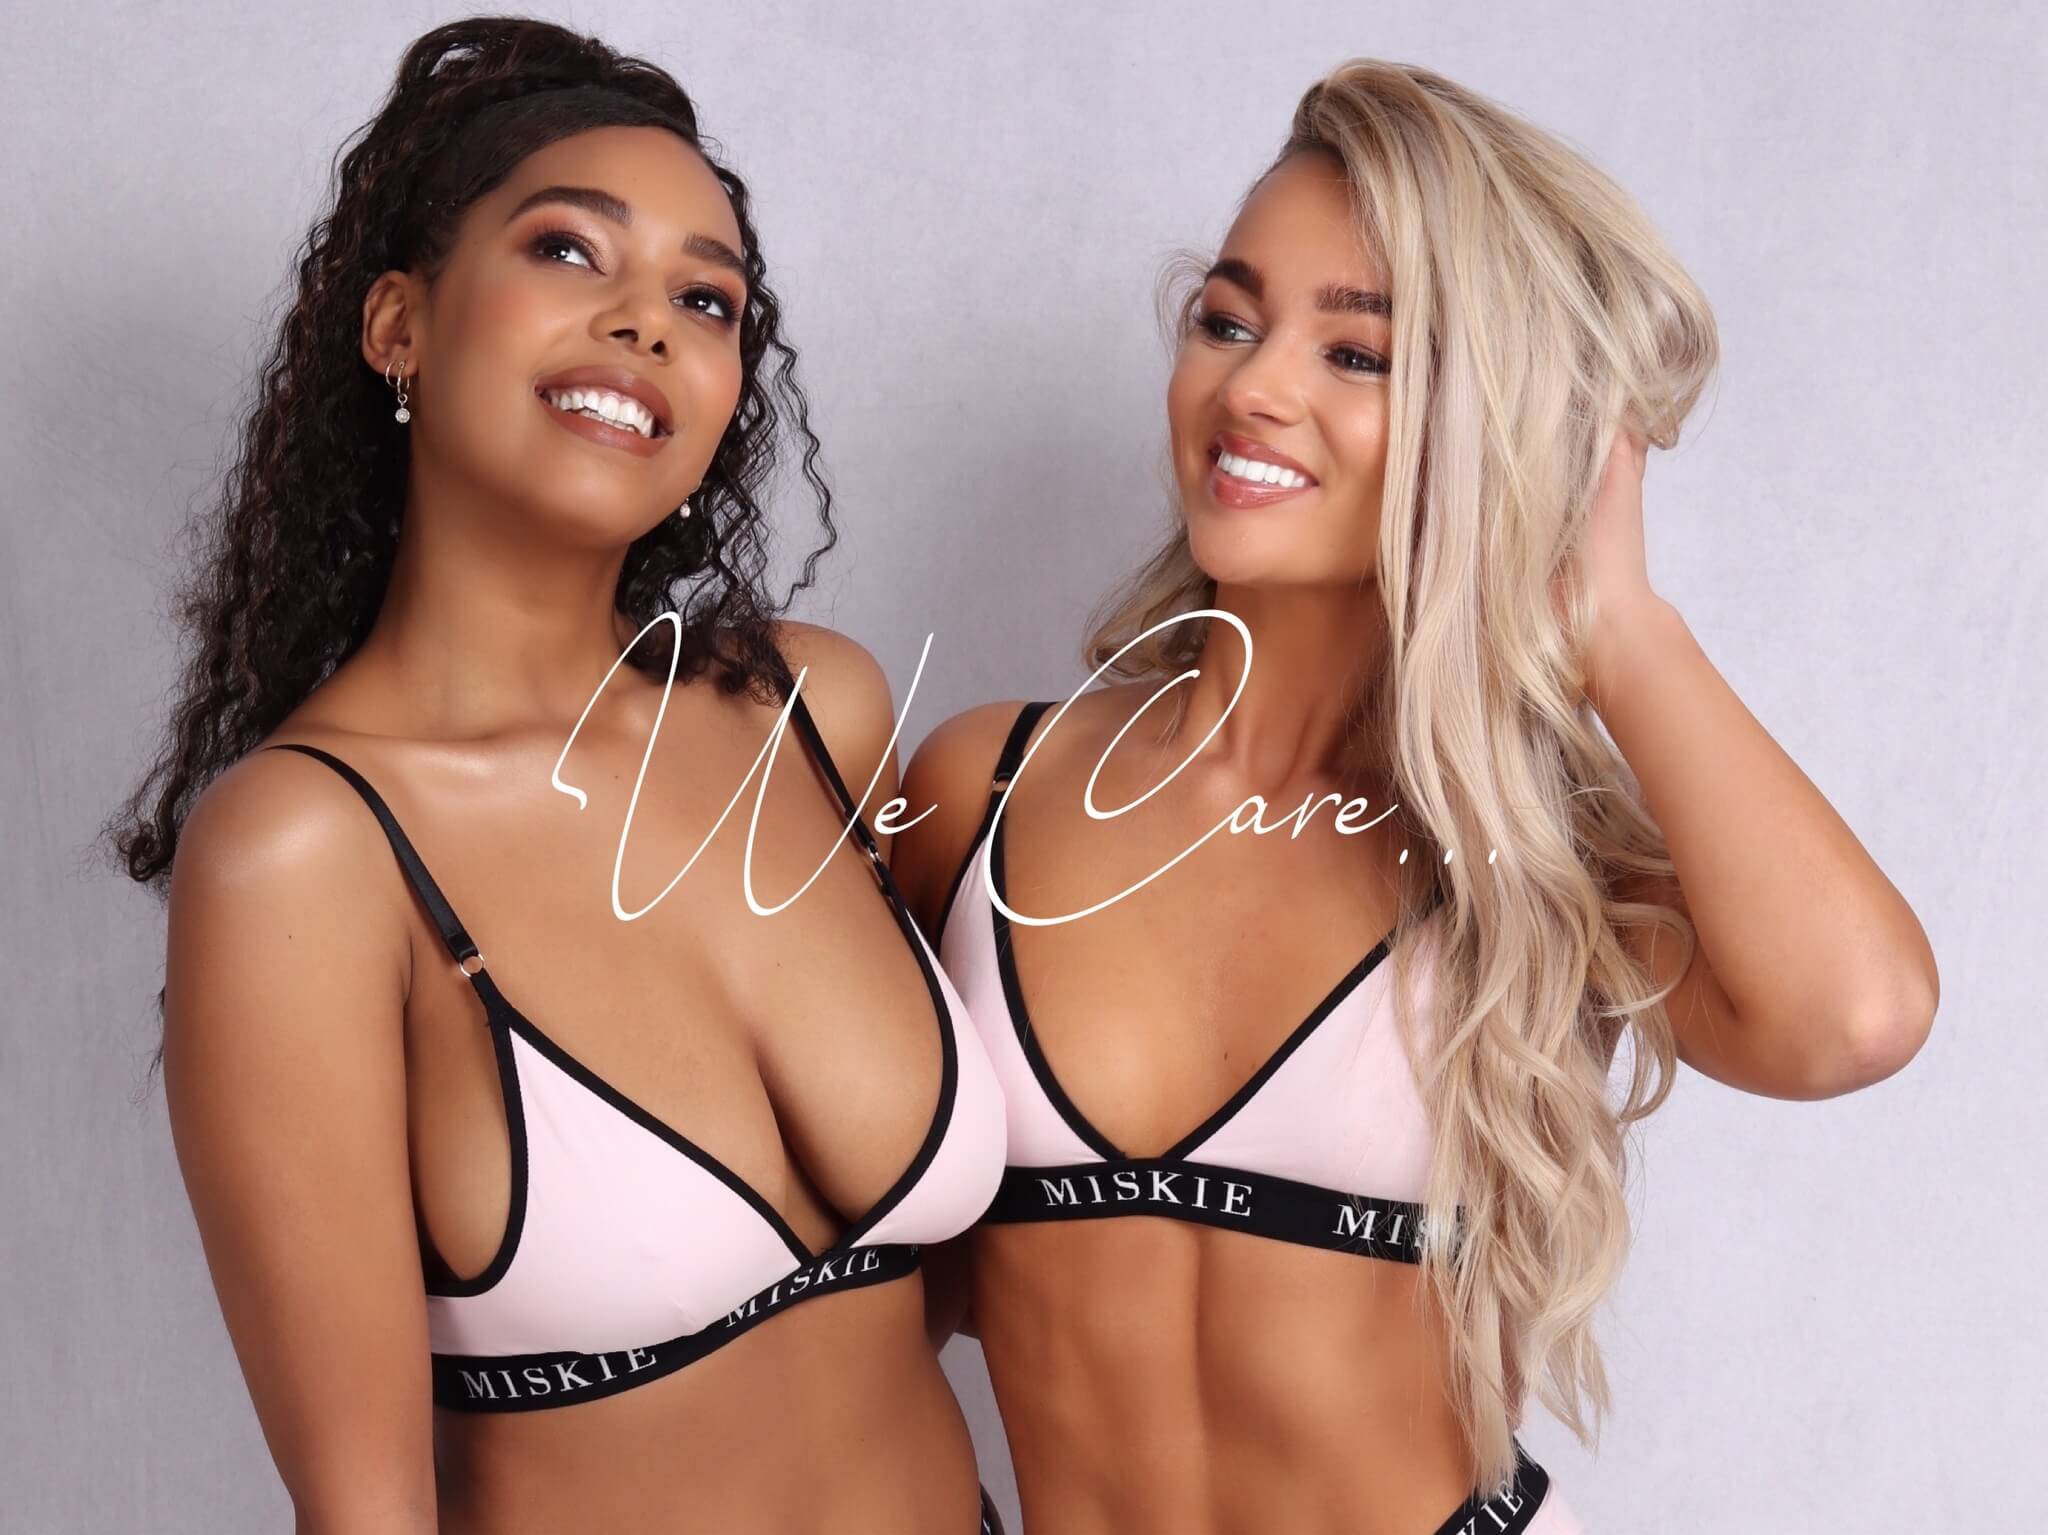 two models wearing miskie london pink plush range. luxurious lingerie made ethically in England.